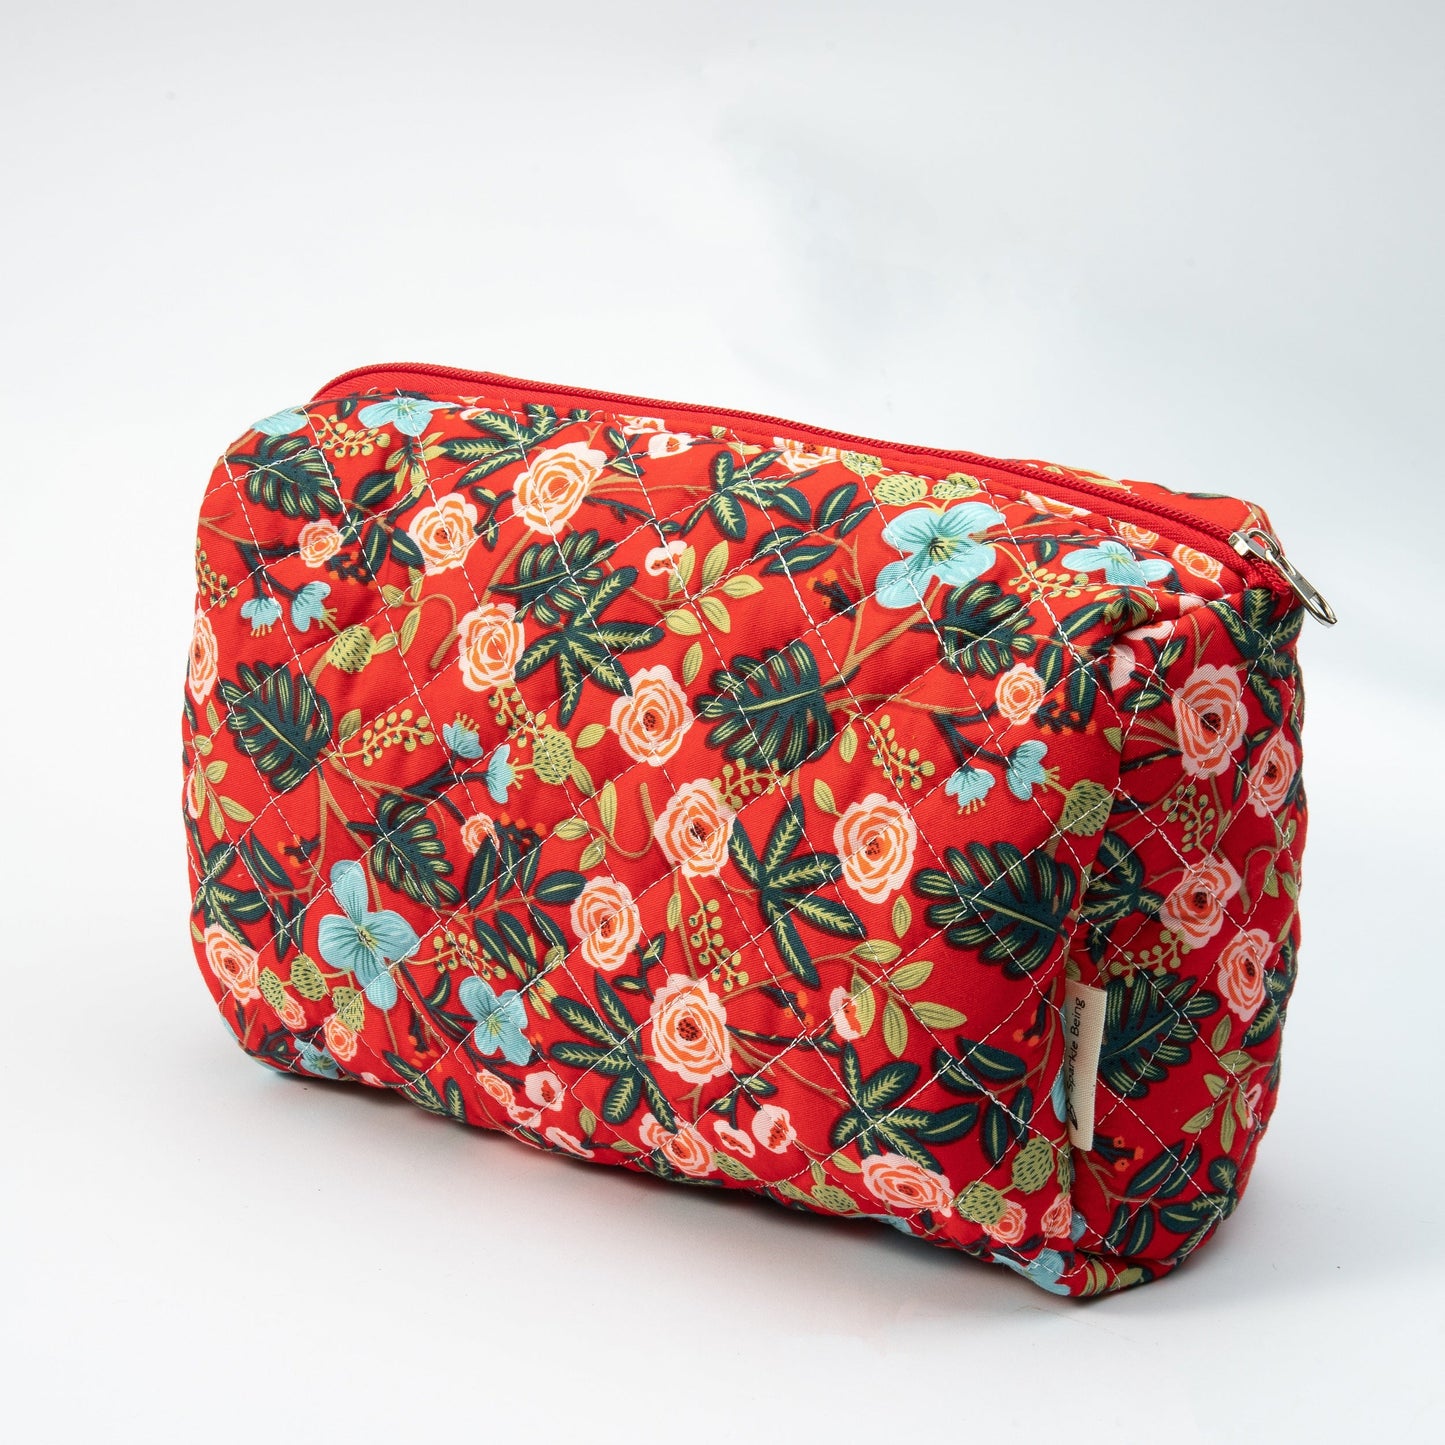 Puffy Makeup Bag, Quilted Makeup Bag for Travel